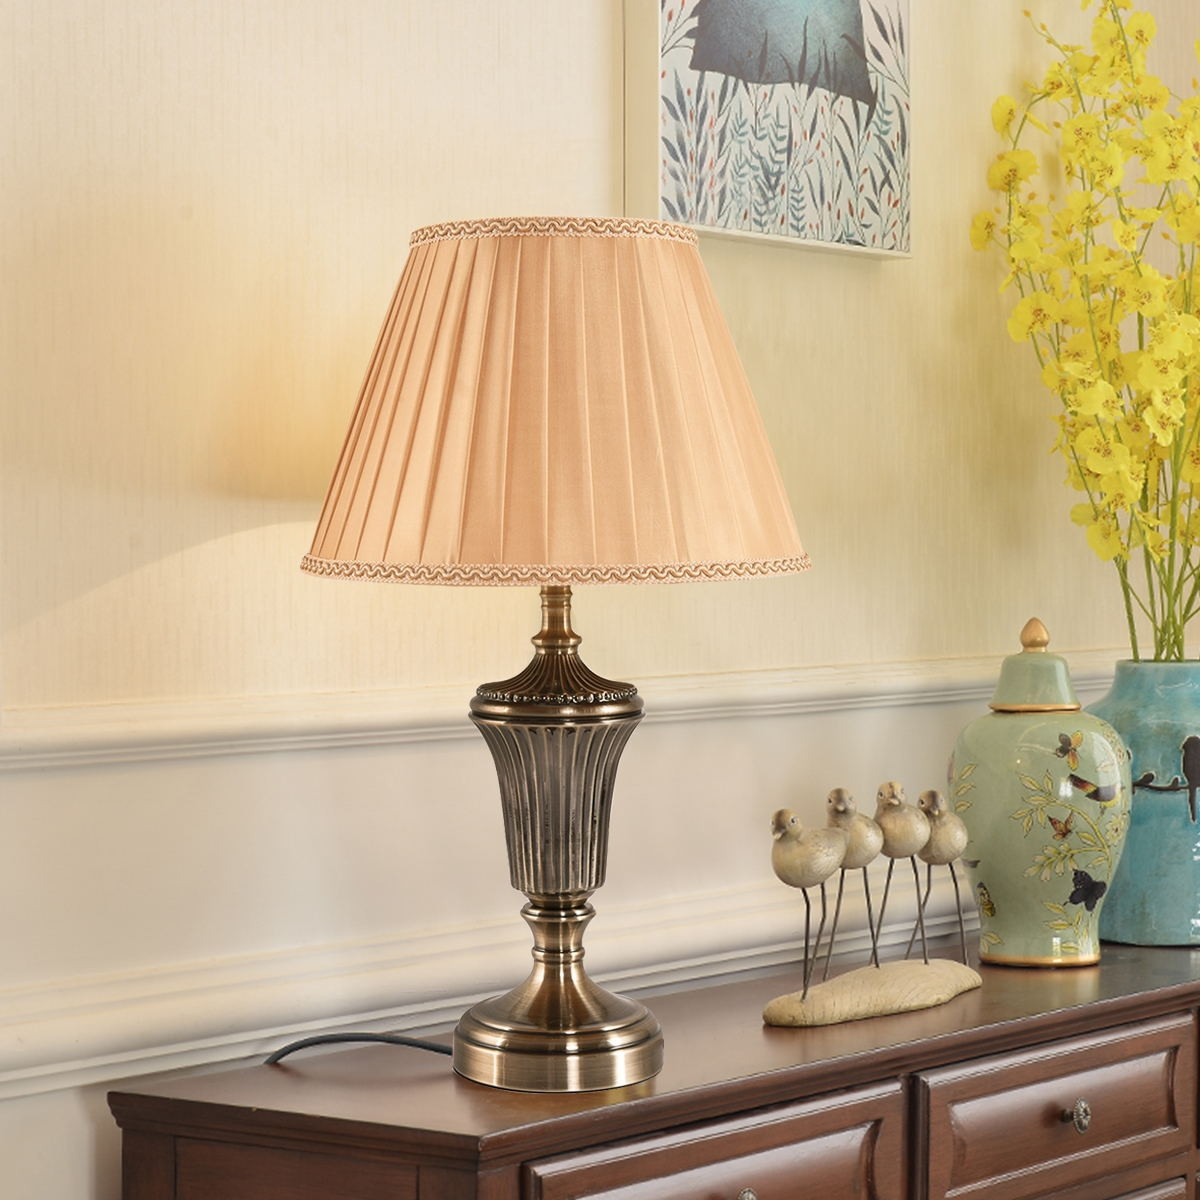 25 In. Antique Brass Table Lamp With LED Bulb